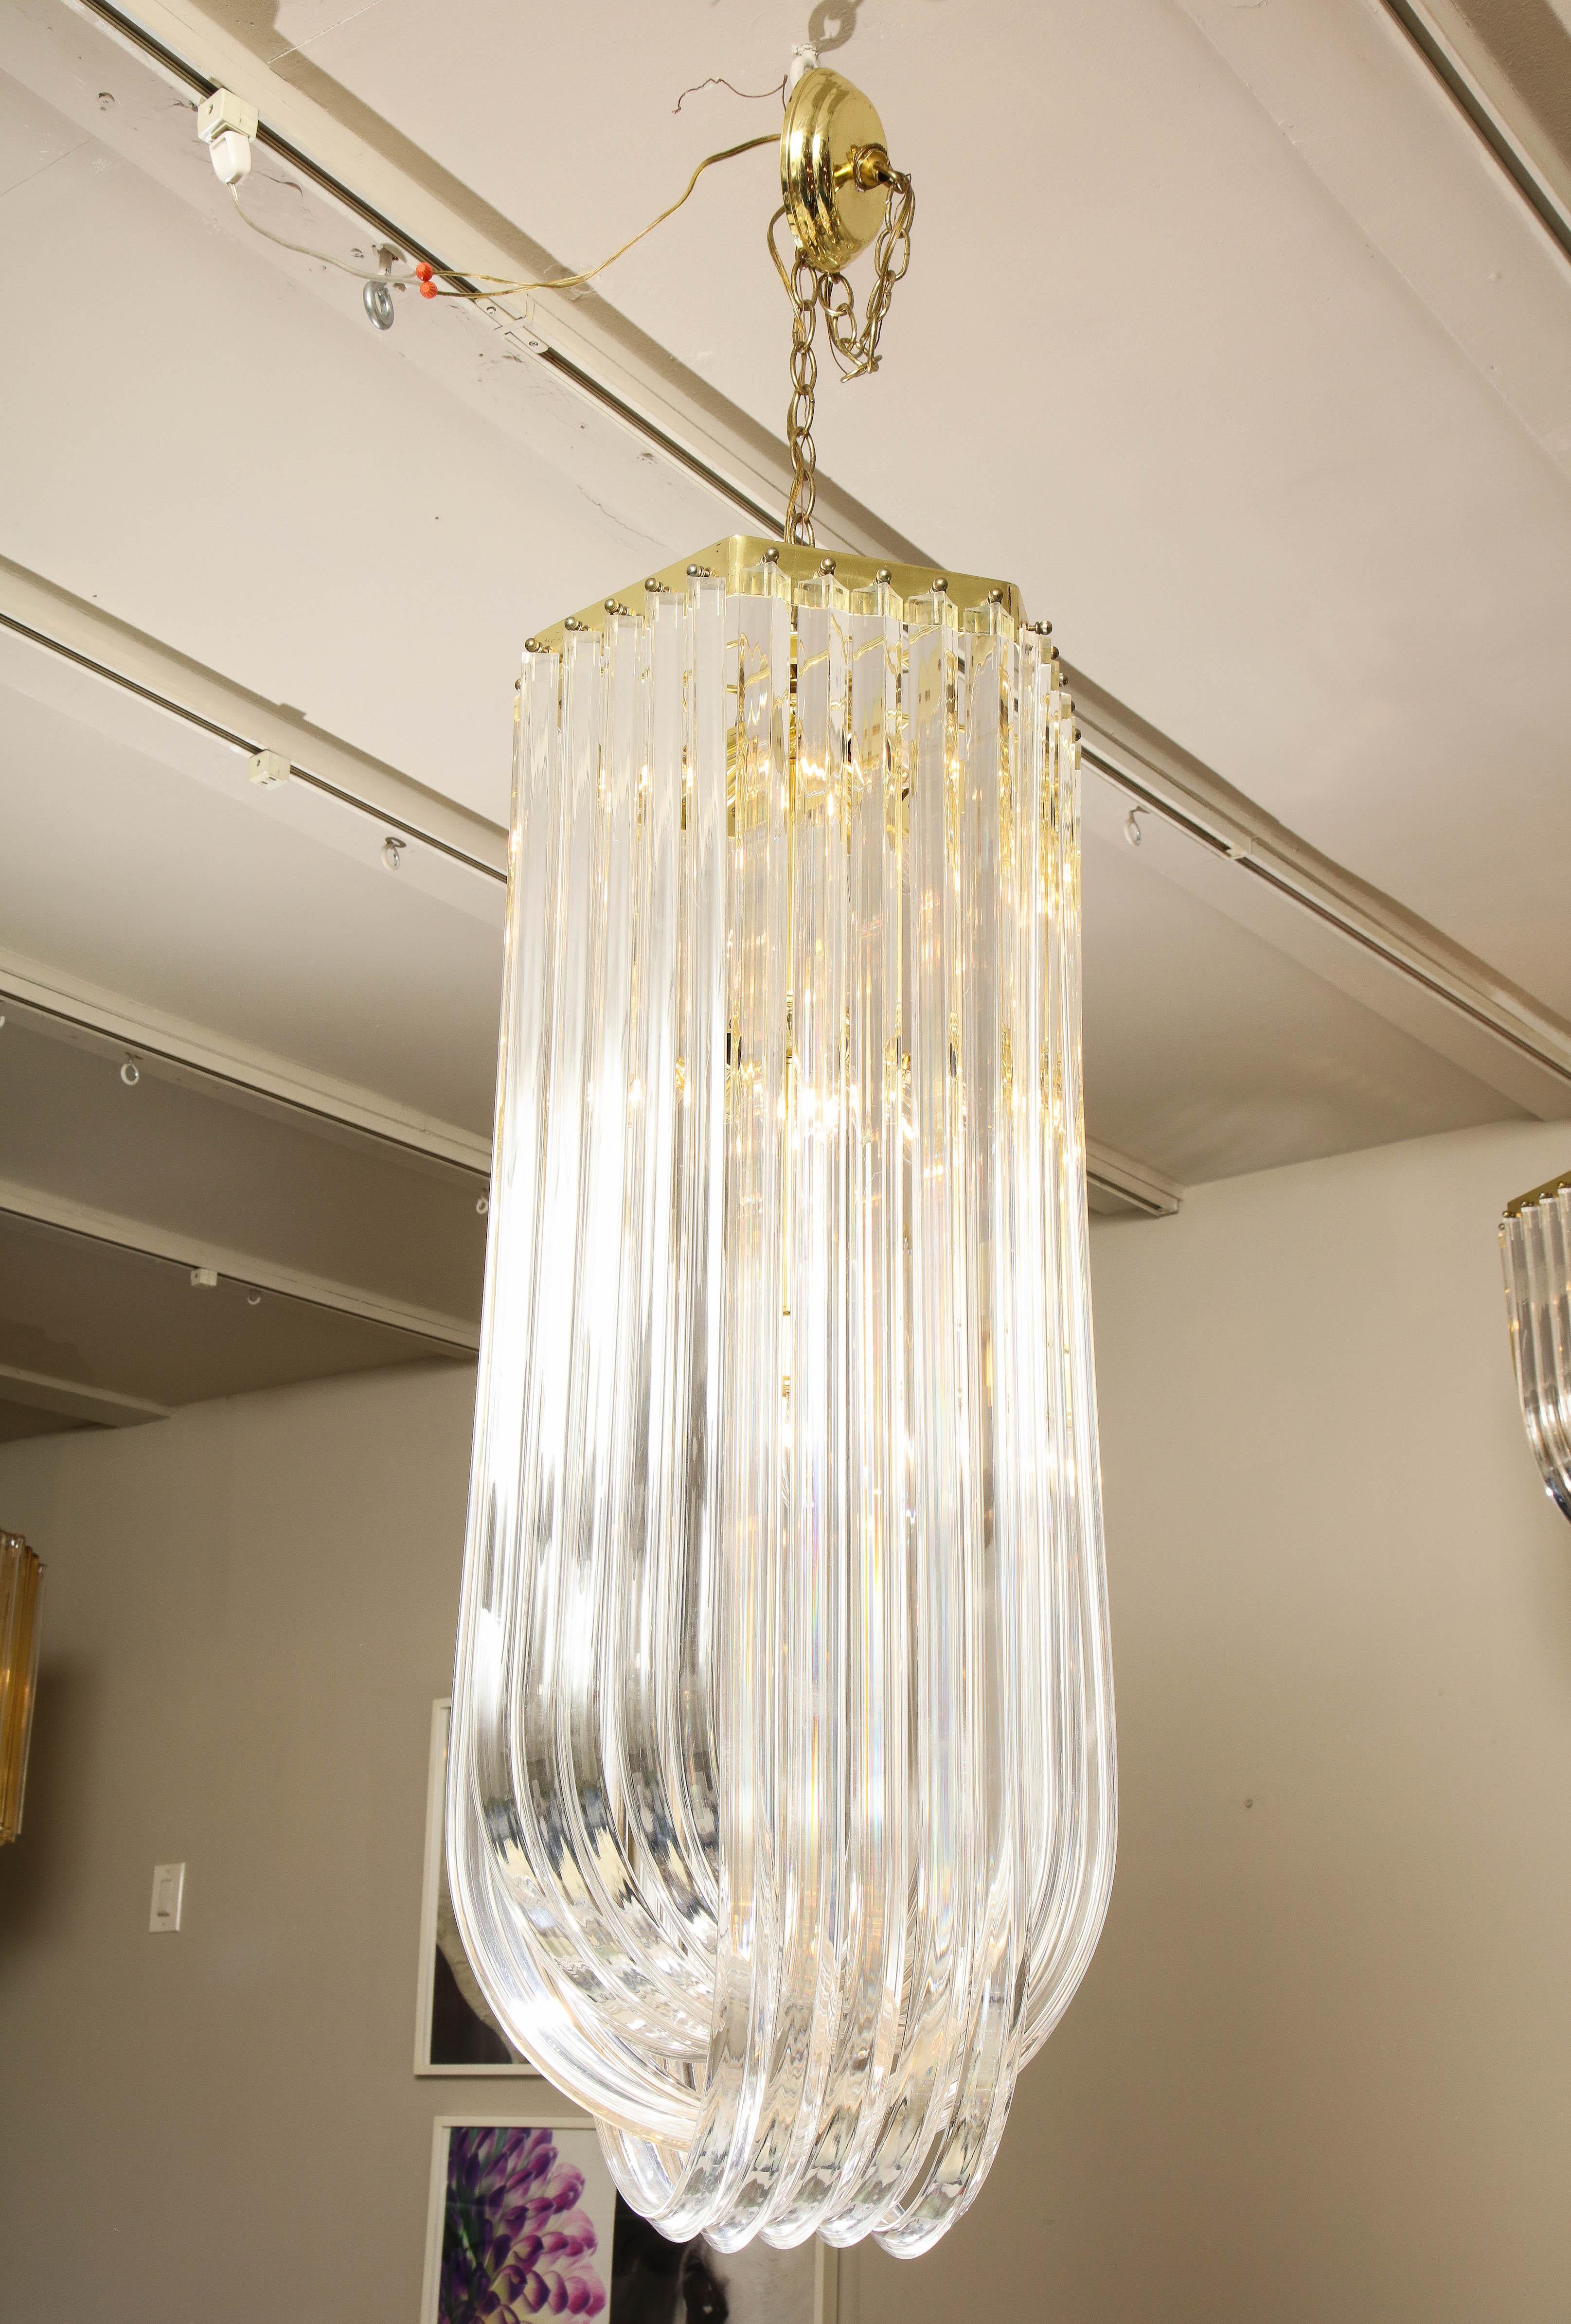 Long midcentury curved Lucite ribbon chandelier in brass finish. 15 candelabra (E12) sockets. Some aging on brass frame and scratches on acrylic pieces.